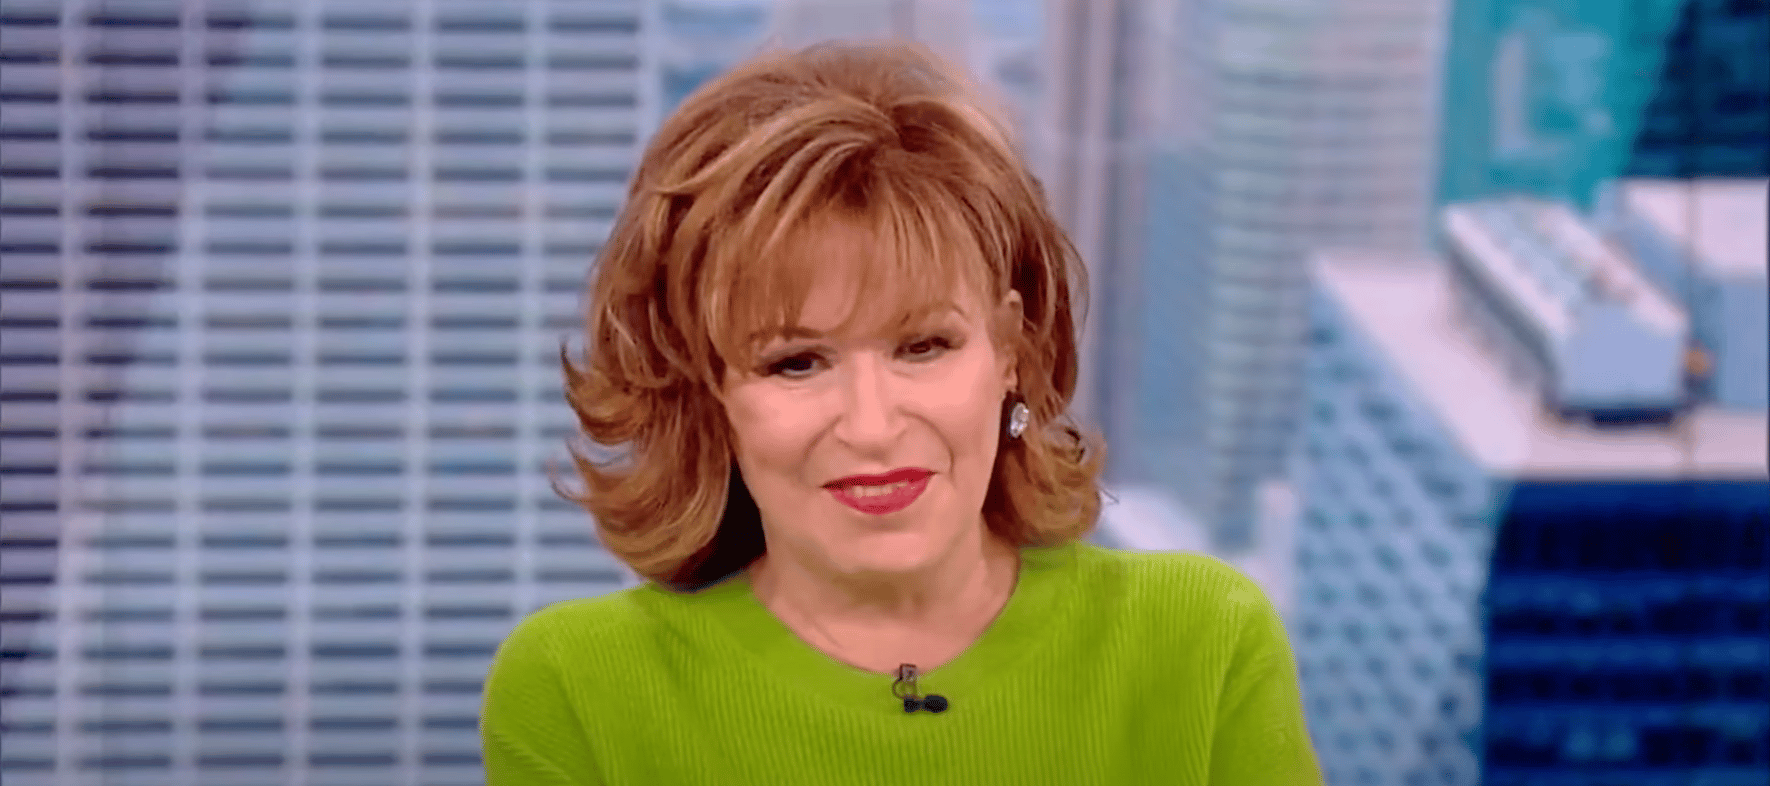 (WATCH) Joy Behar says she’s “Had sex with a few Demons” during ‘View’ segment on “Haunted Texas Home”